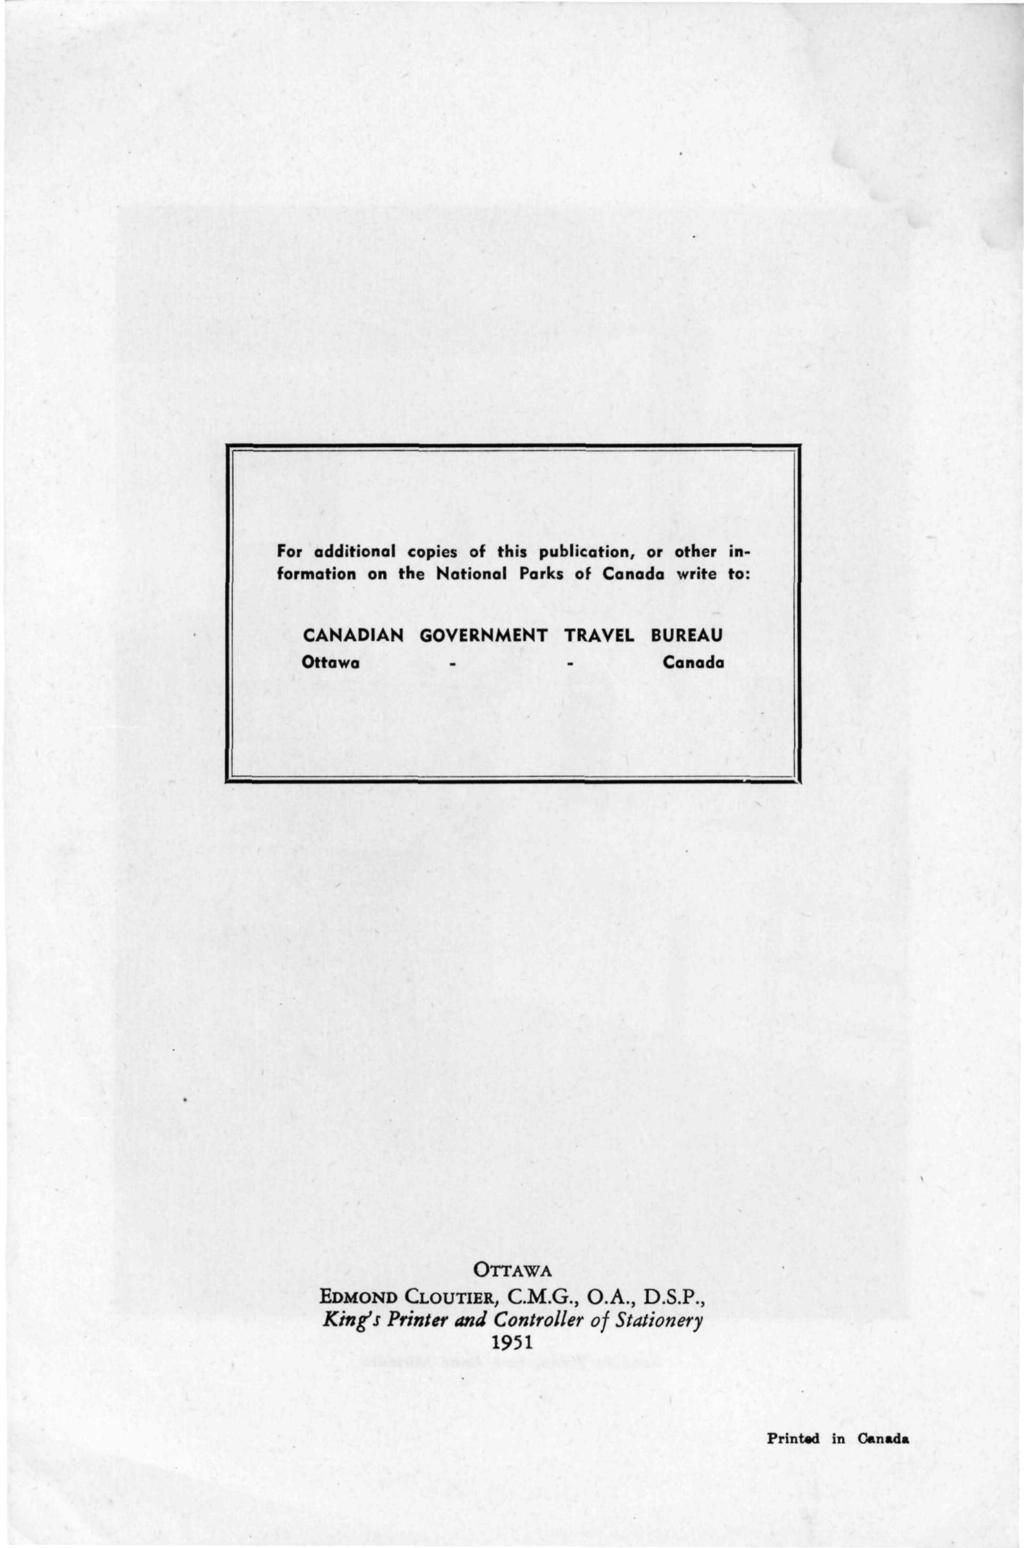 For additional copies of this publication, or other information on the National Parks of Canada write to: CANADIAN GOVERNMENT TRAVEL